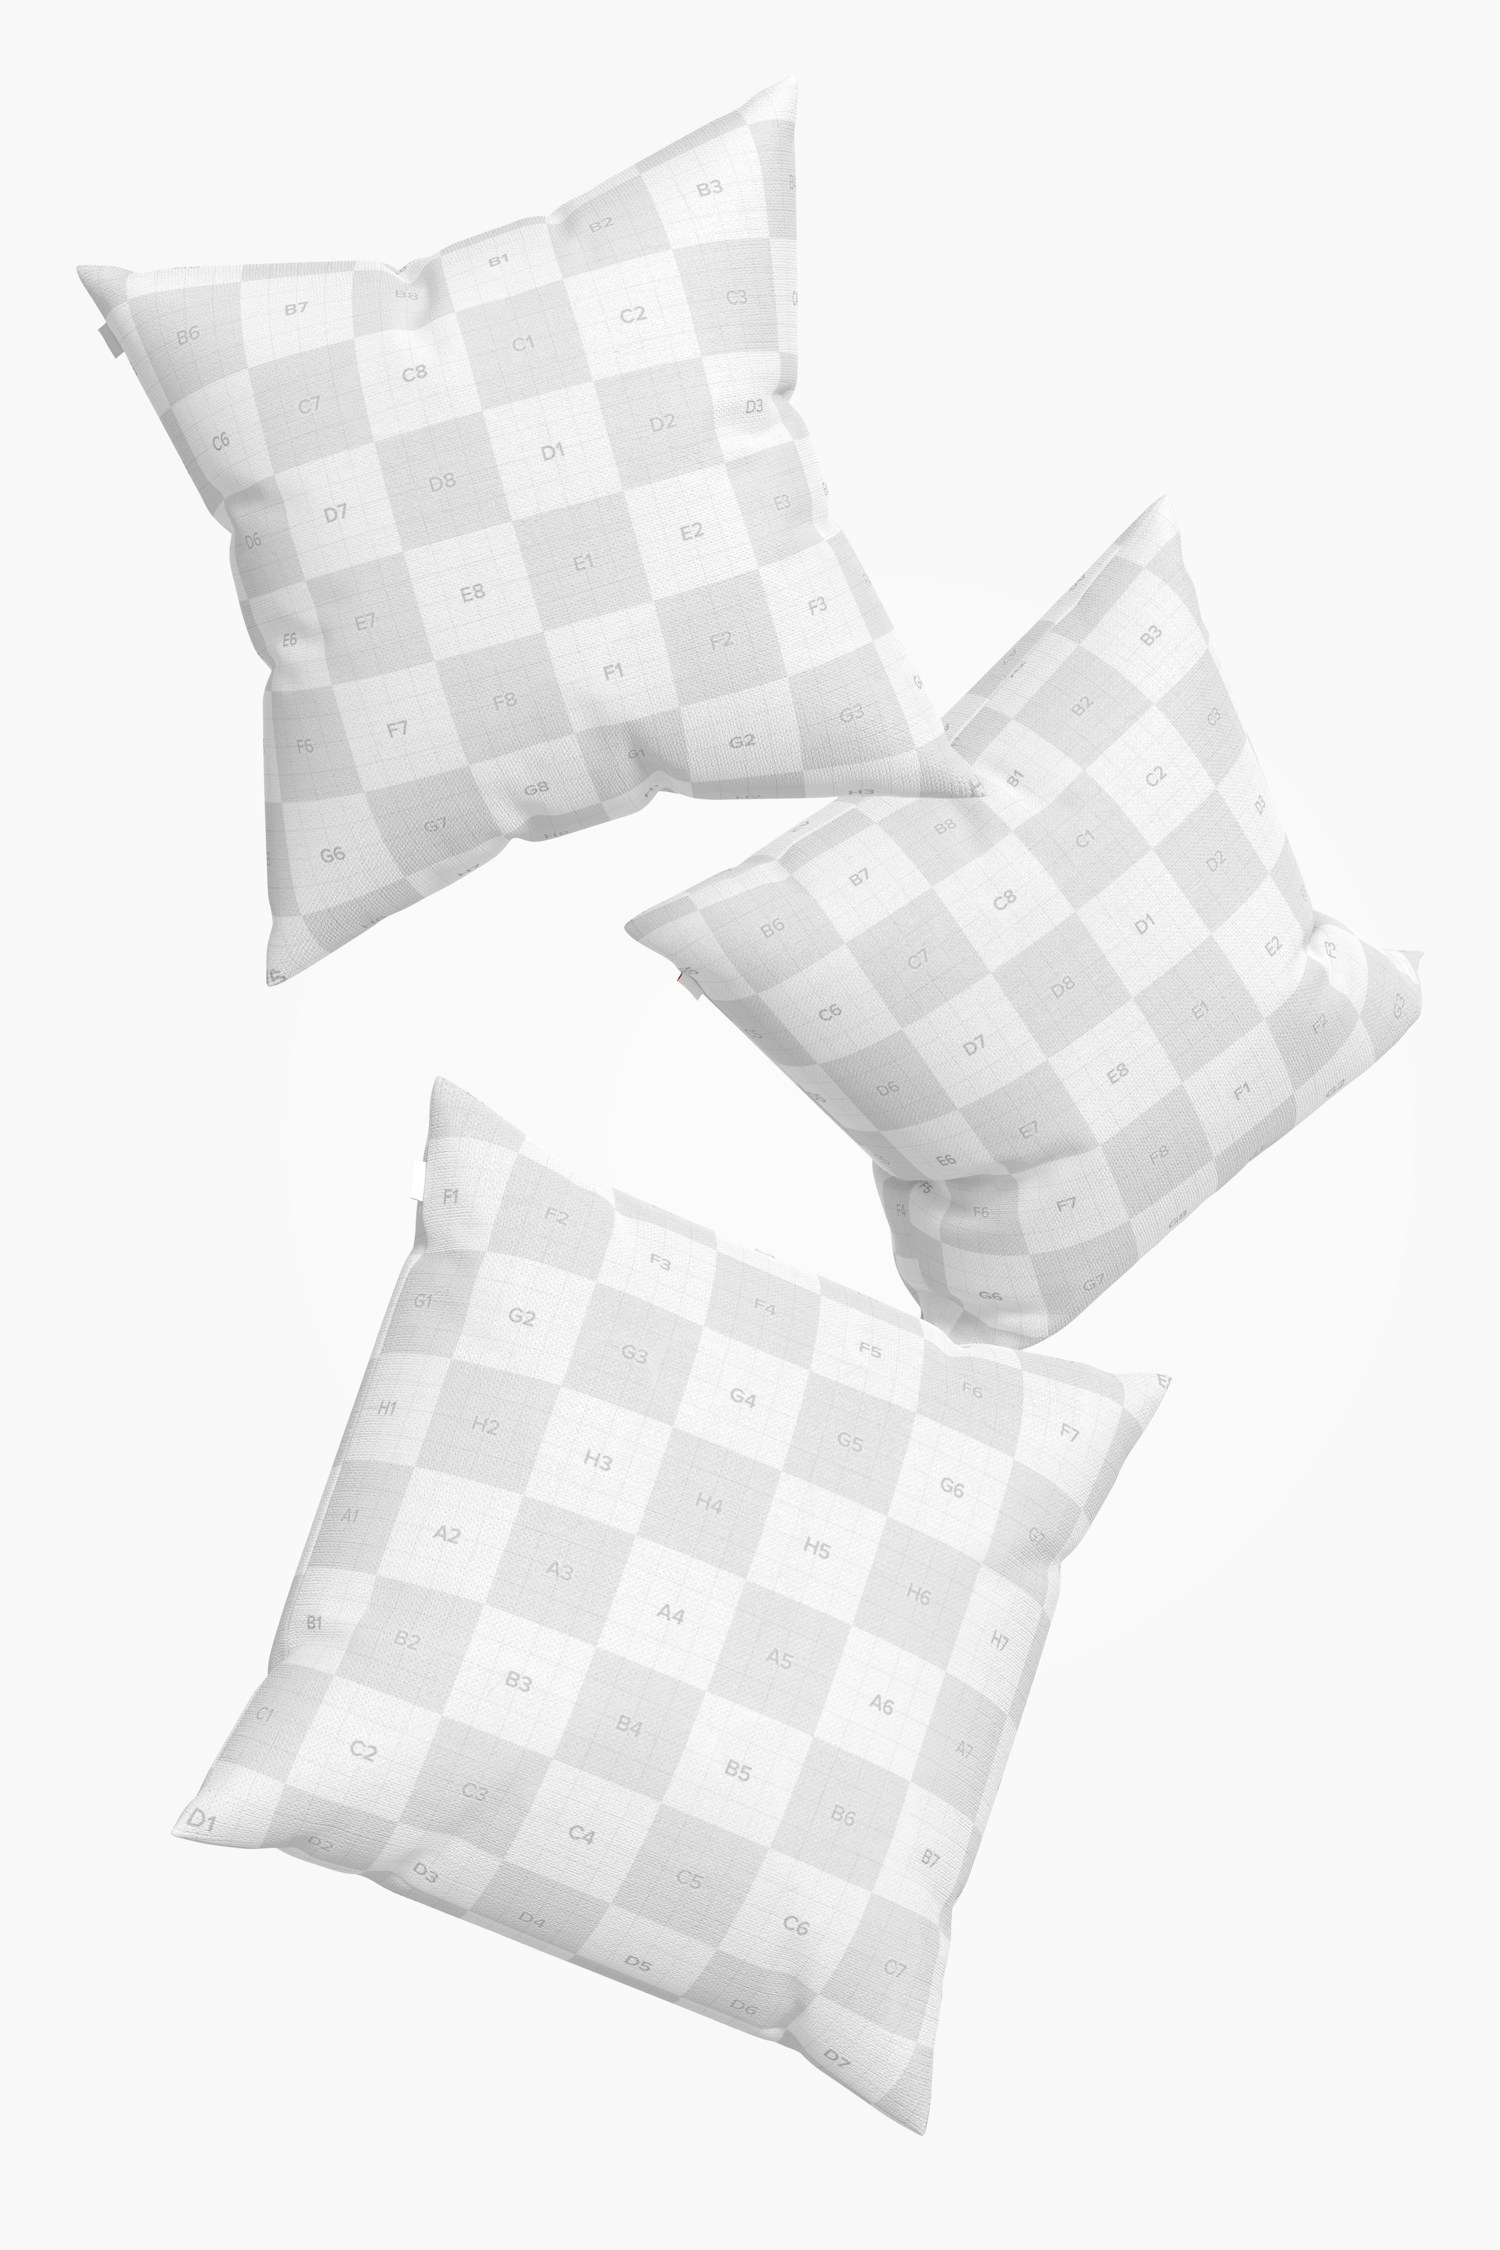 Square Pillows Mockup, Floating